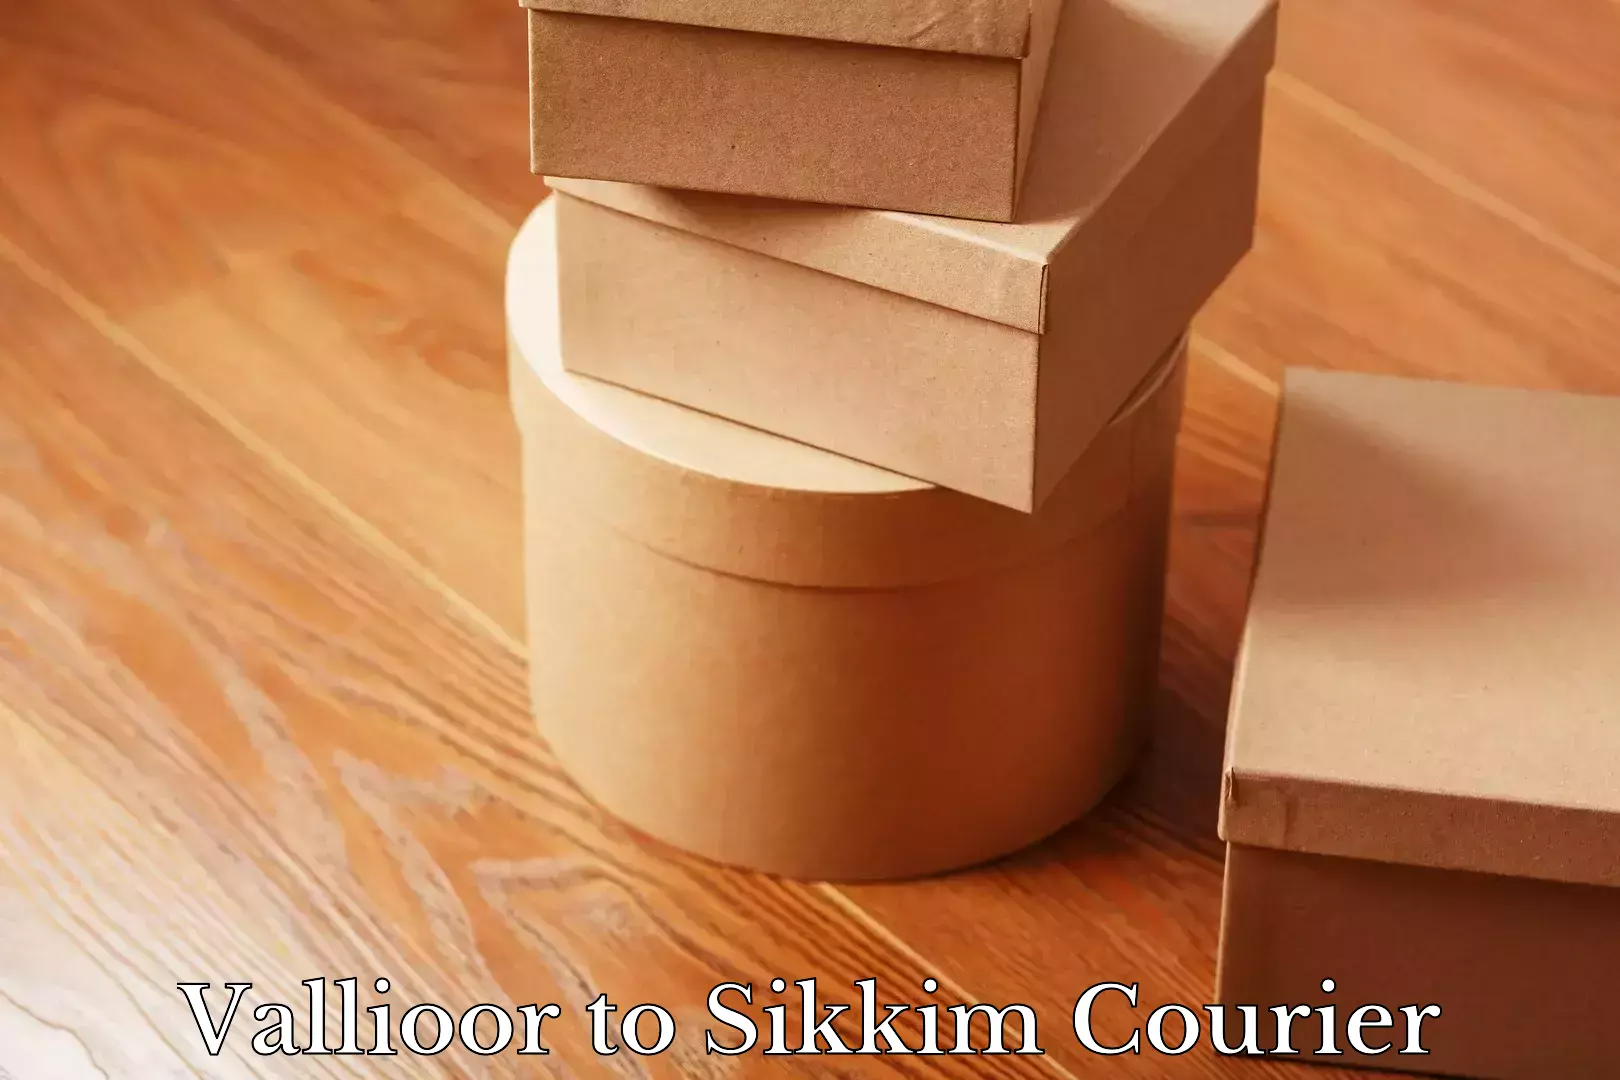 Full-service courier options Vallioor to Sikkim